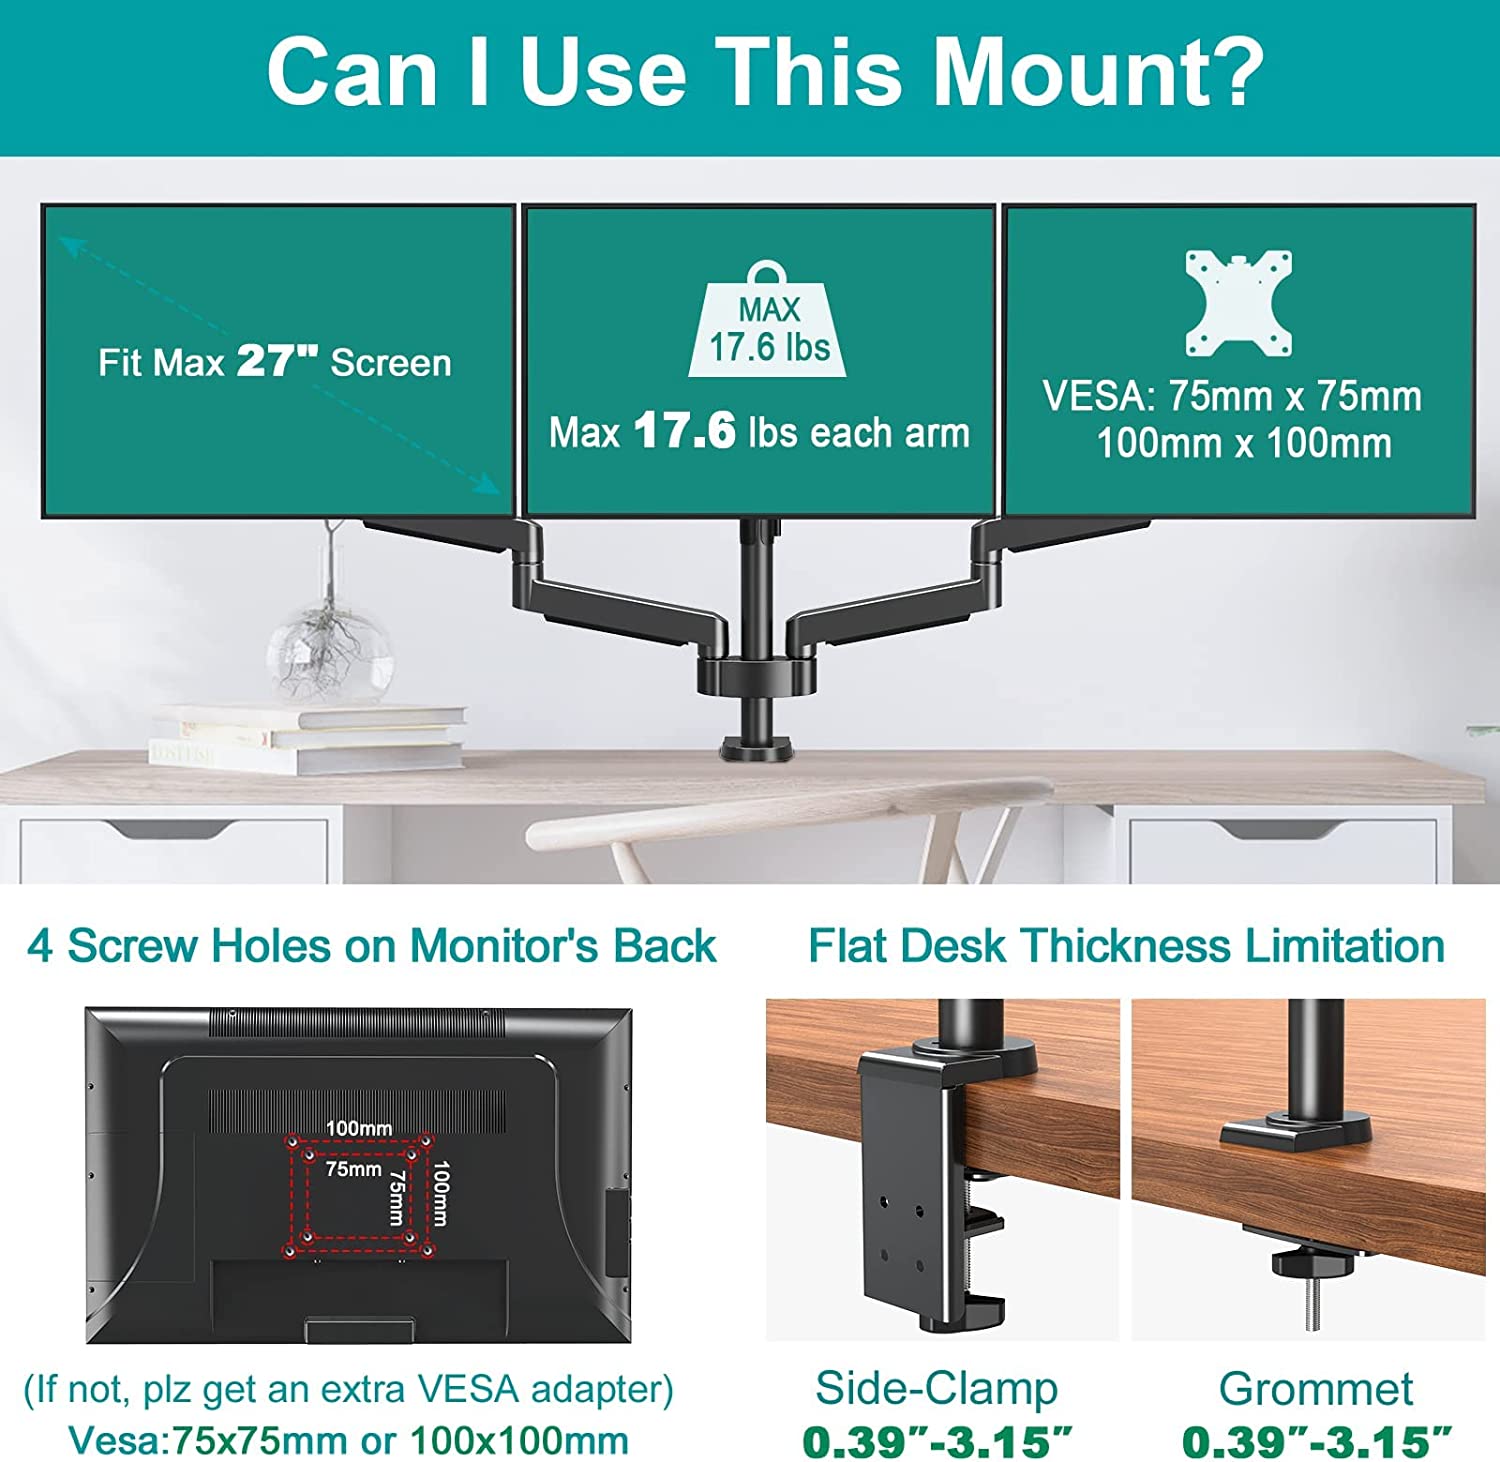 triple monitor mount for 13''-27'' screen loading up to 17.6 lbs.